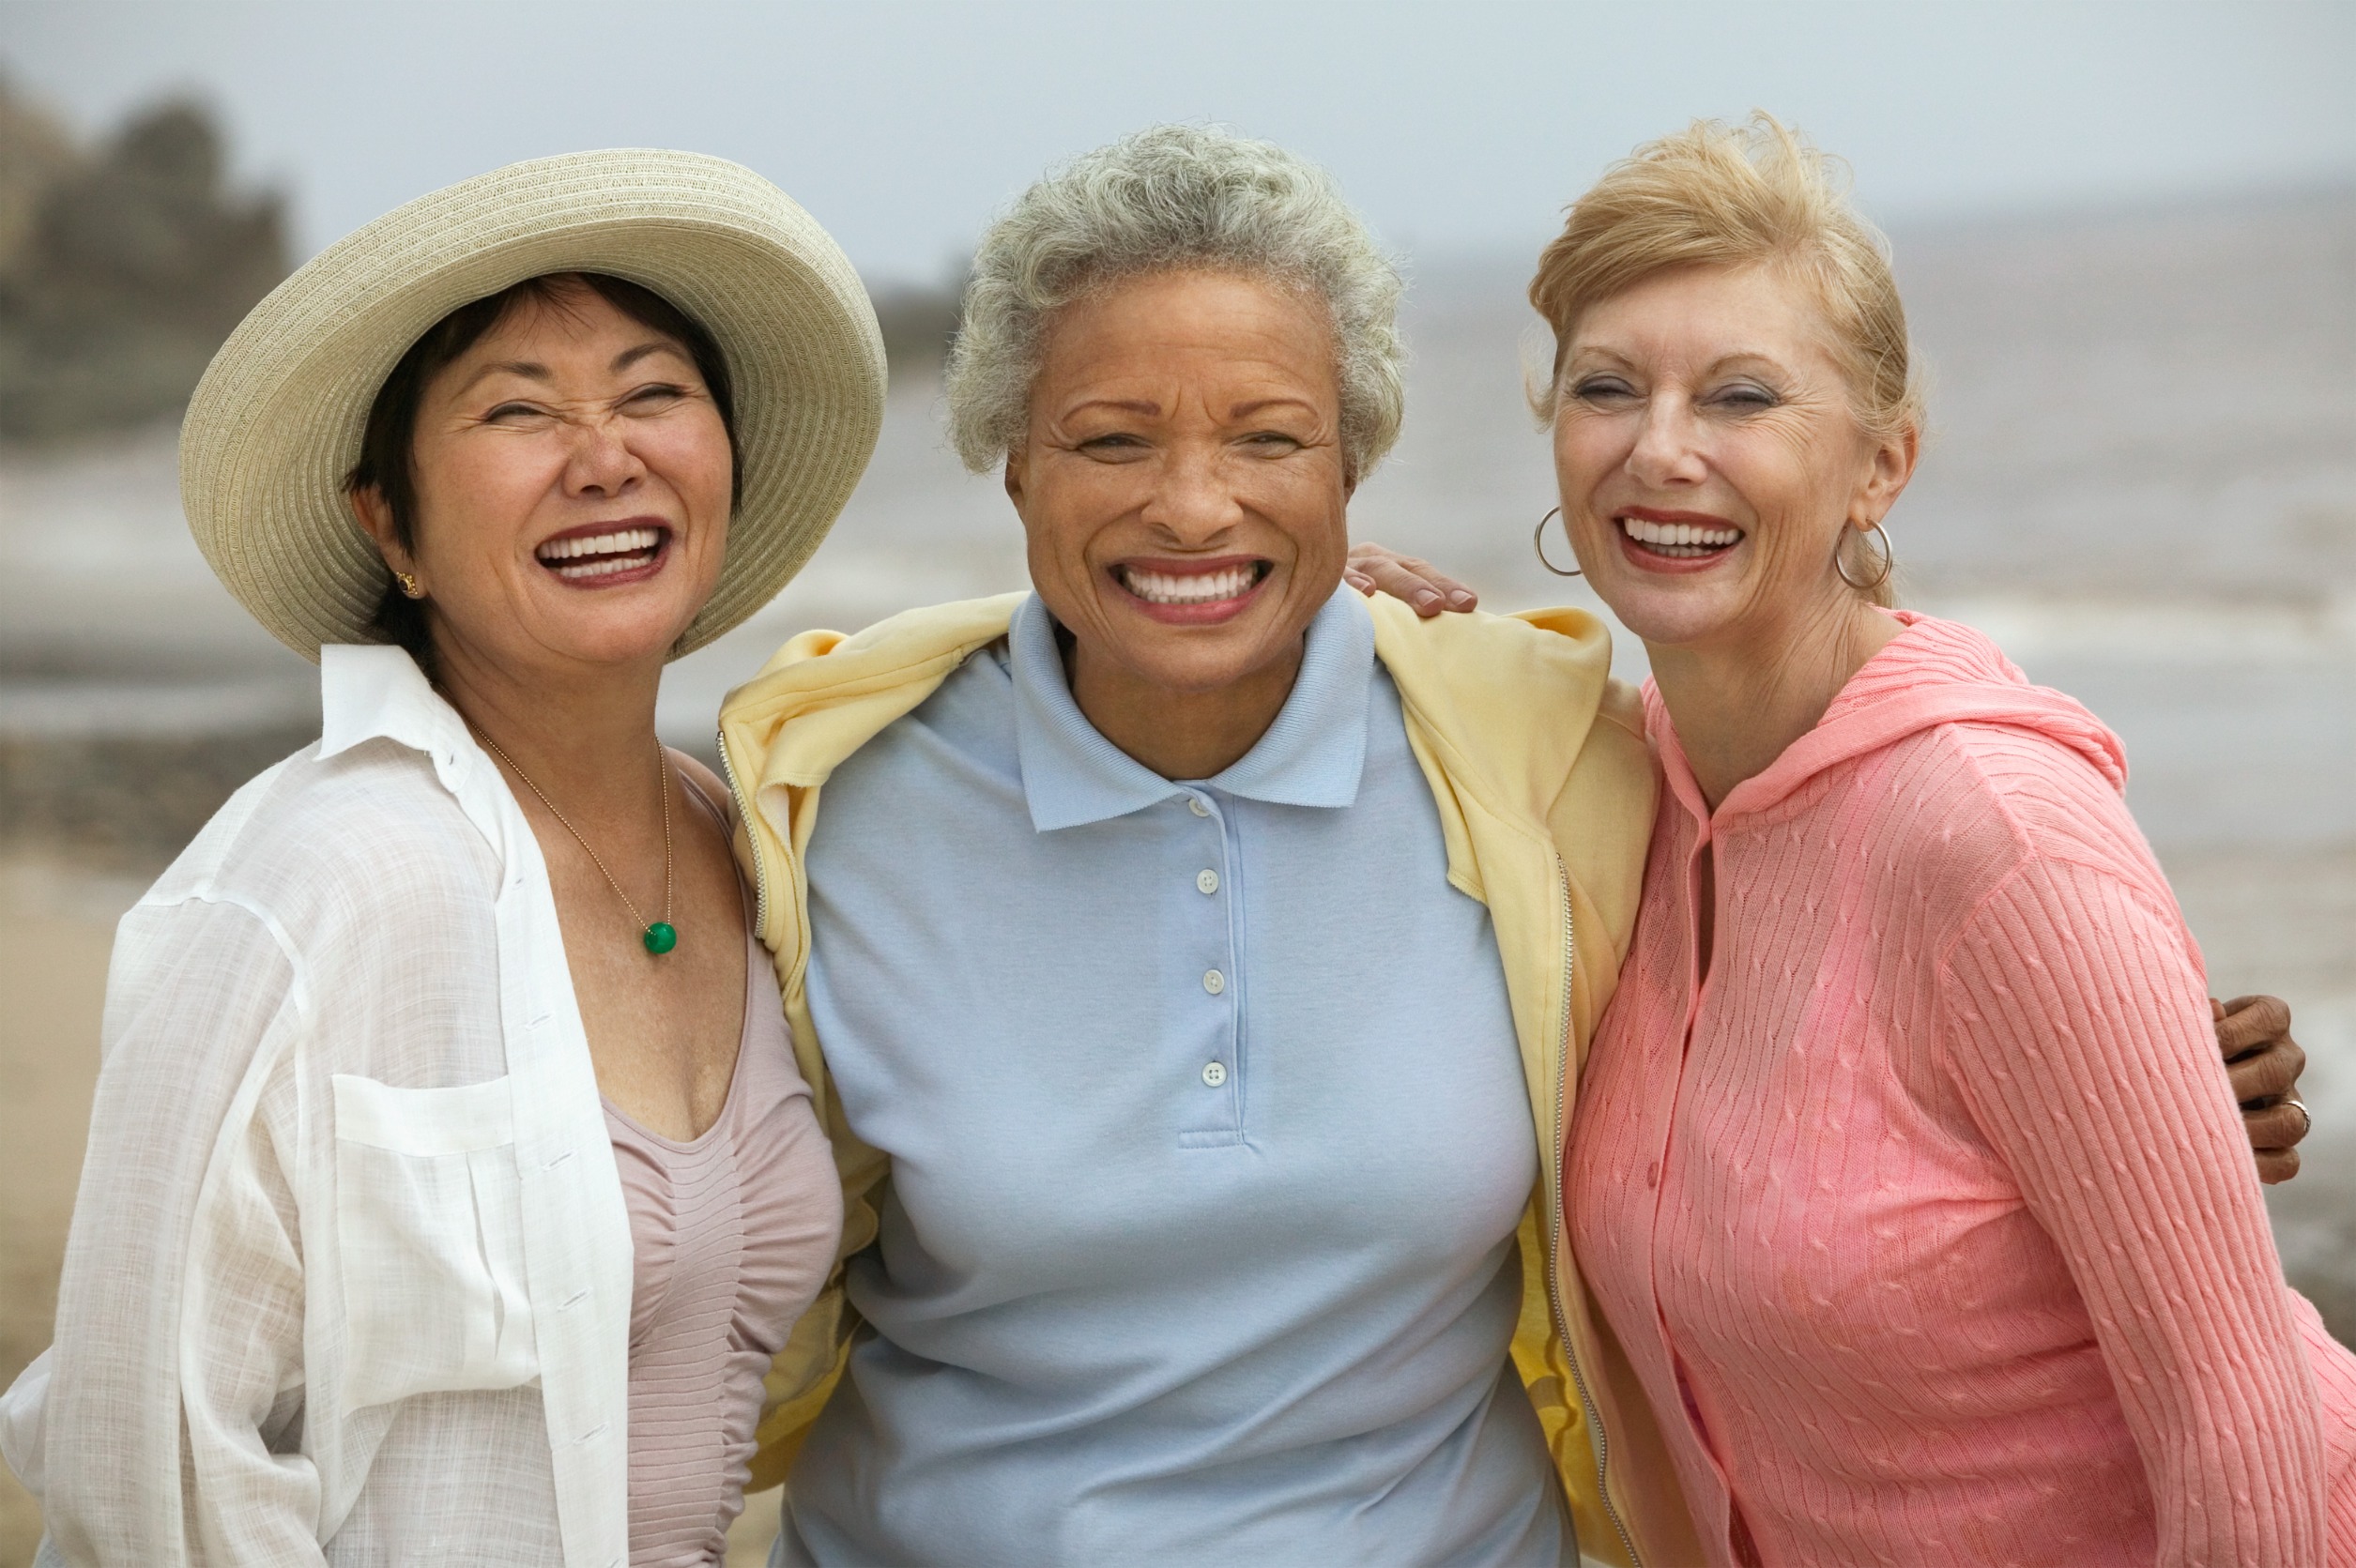 <p>As life gets busier, it’s easy to neglect friendships, something many regret as they grow older. Strong friendships enrich your life, providing support, laughter, and memories. Prioritizing these relationships is crucial for a well-rounded, happy life.</p>